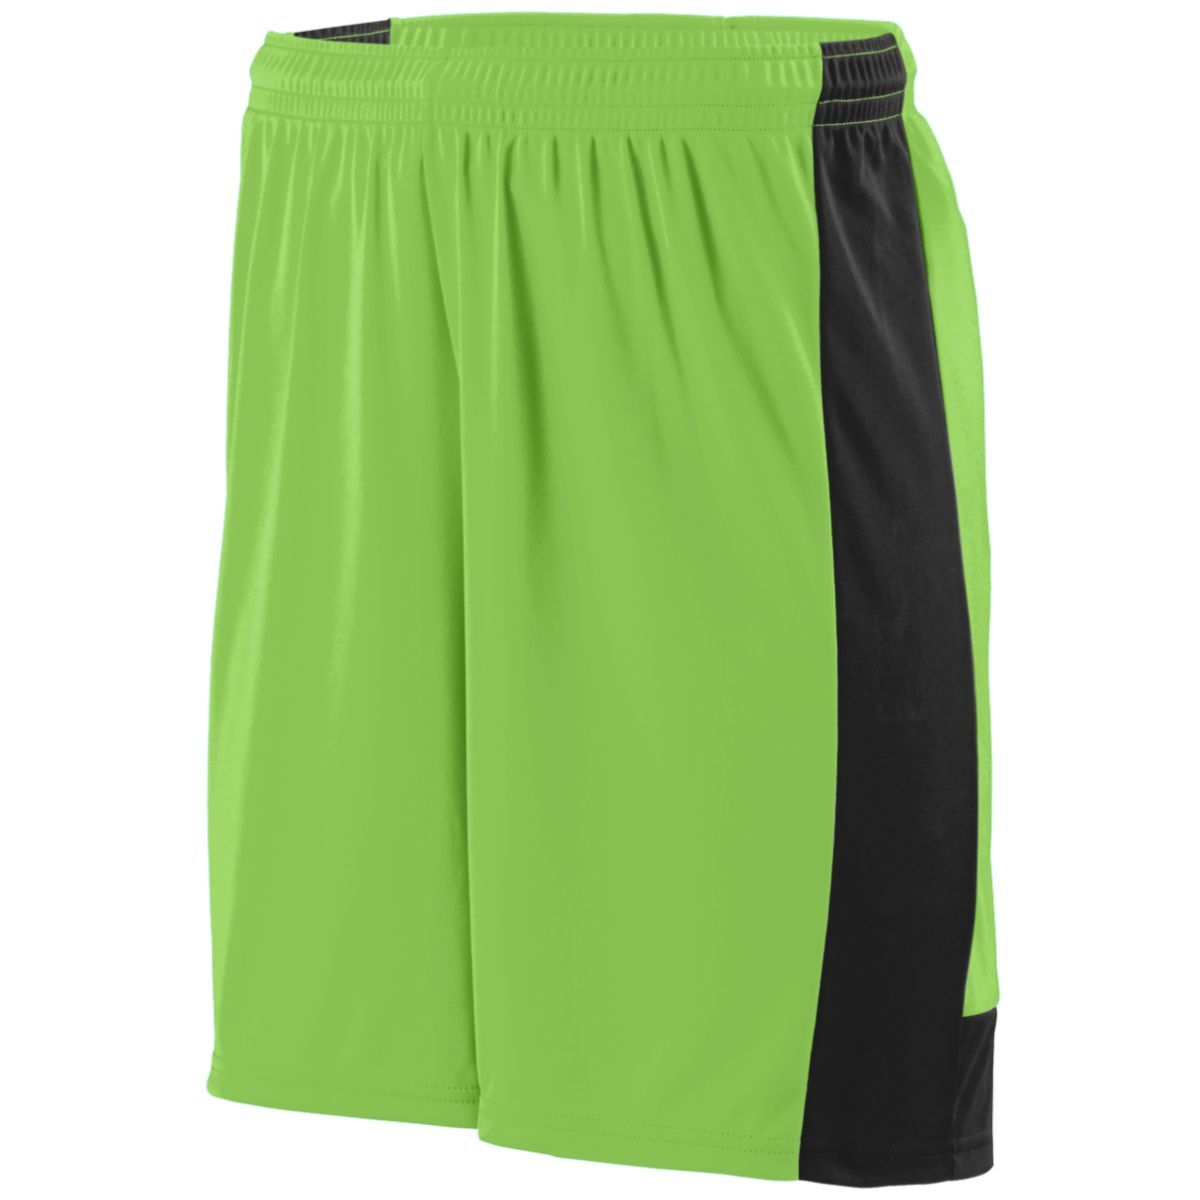 Augusta Sportswear Youth Lightning Shorts in Lime/Black  -Part of the Youth, Youth-Shorts, Augusta-Products, Soccer, All-Sports-1 product lines at KanaleyCreations.com